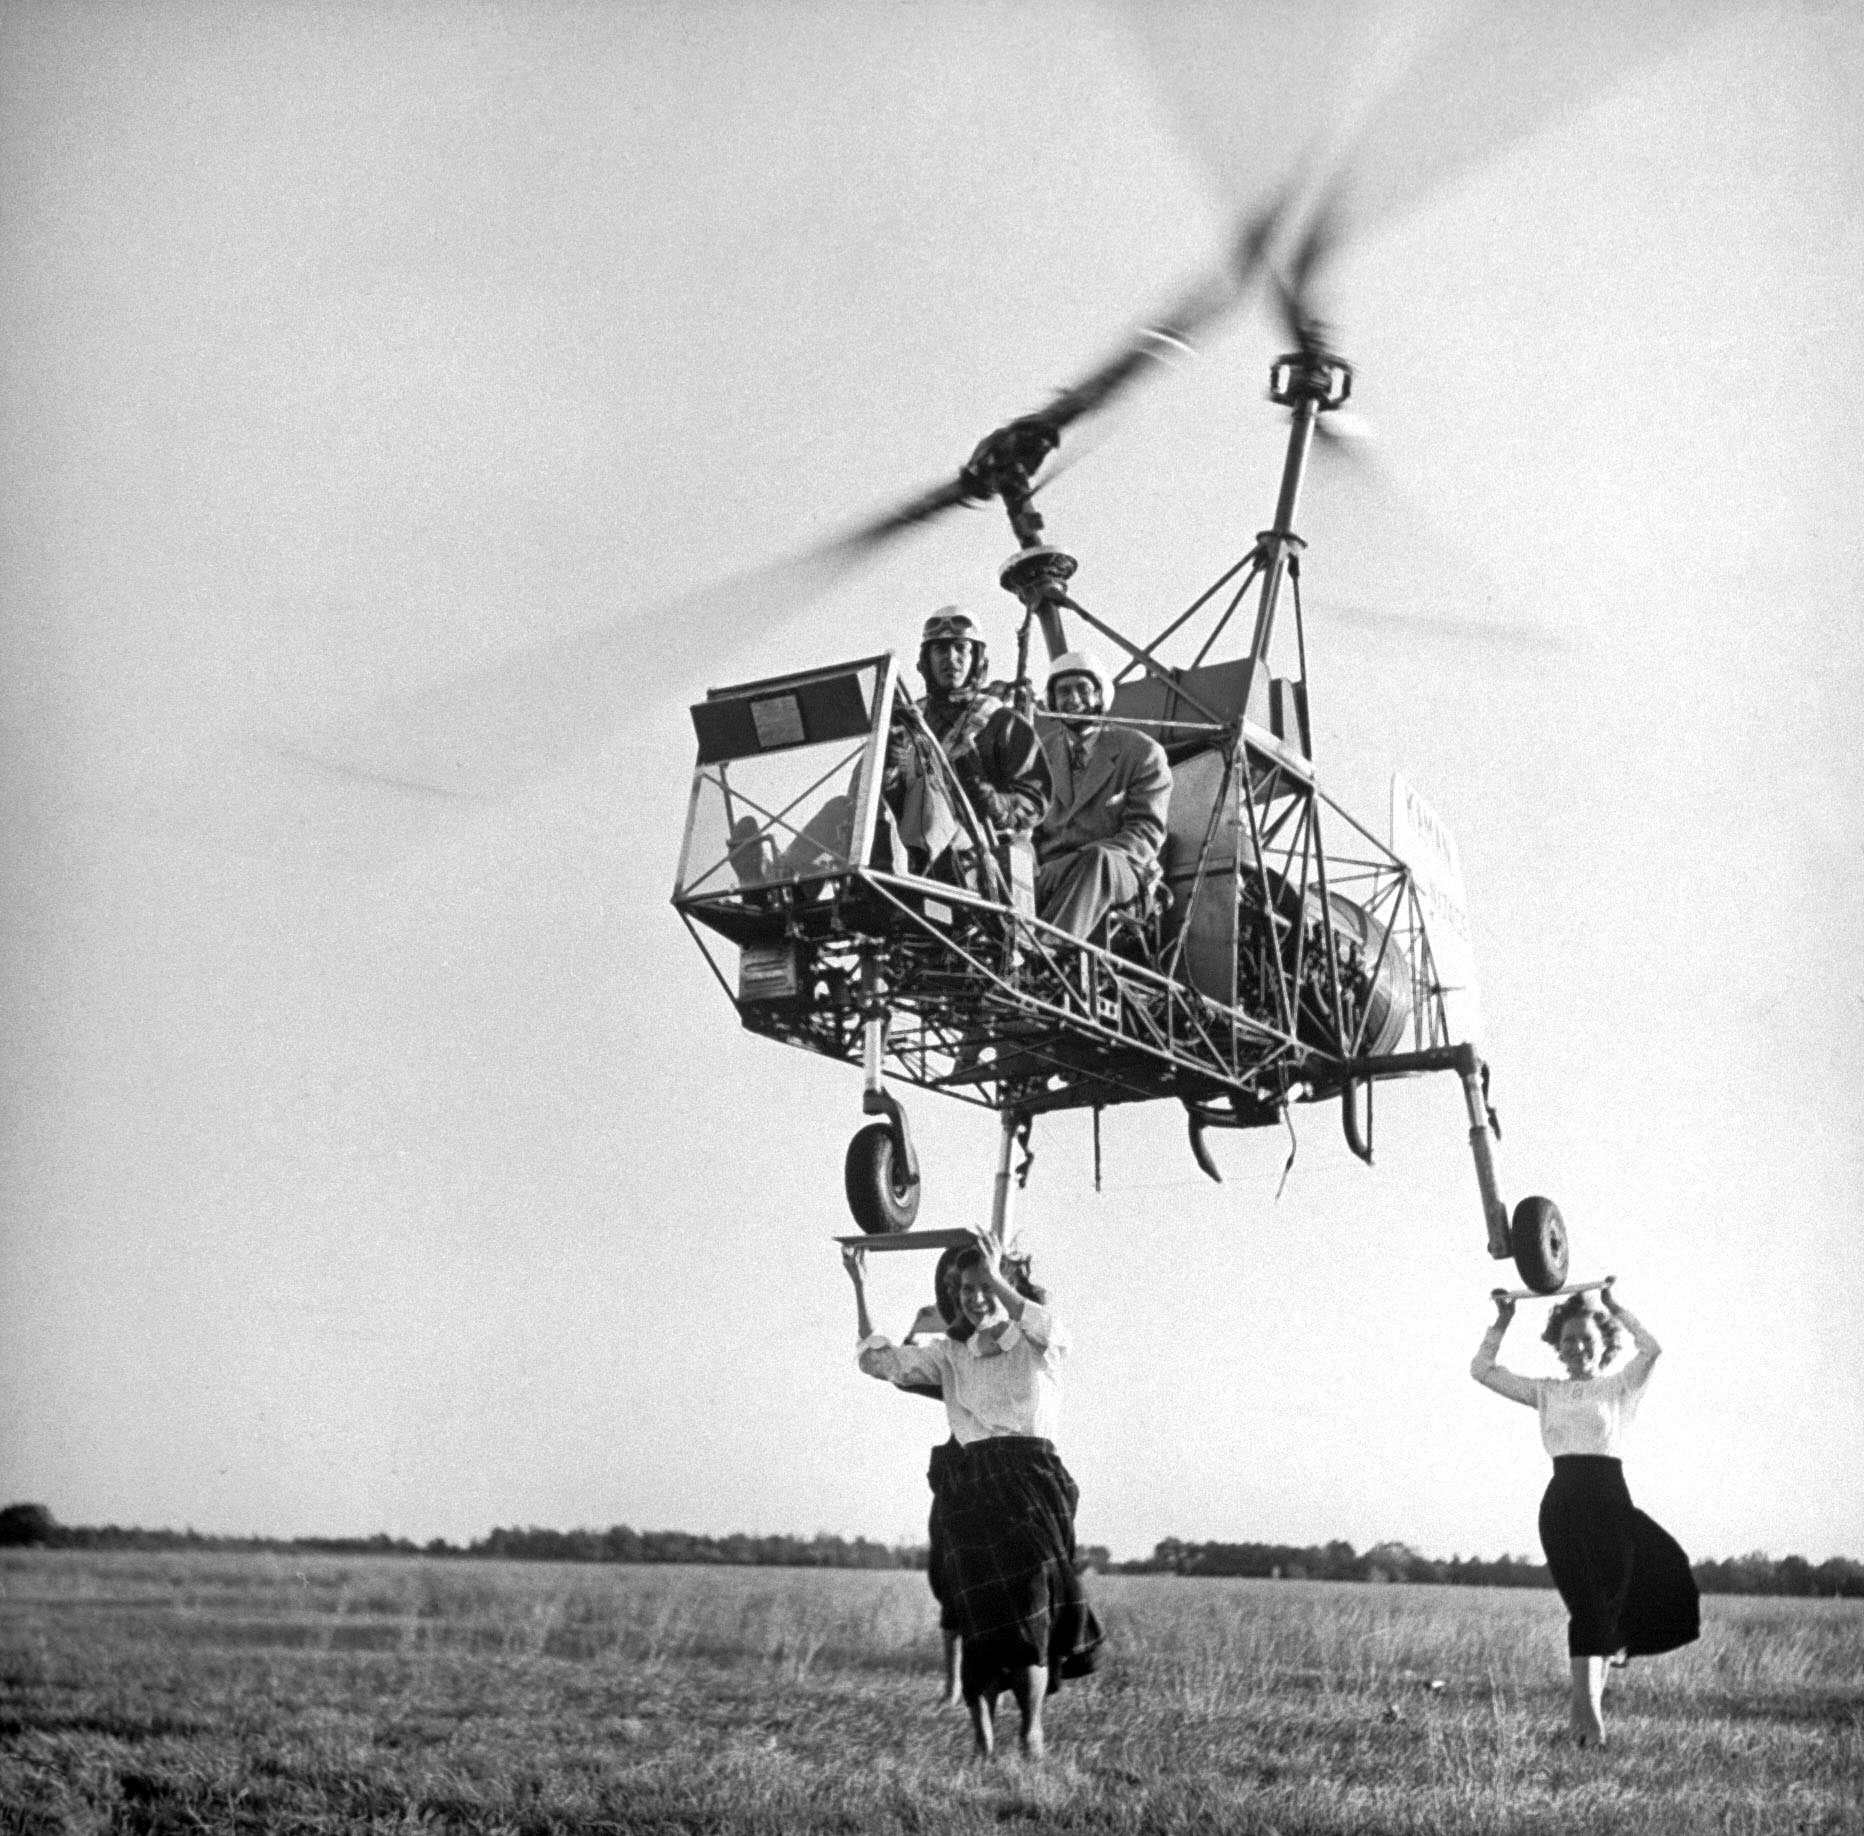 A "K190" helicopter attempting a three-point landing atop the heads of three women holding plywood squares as landing "pads," 1948.